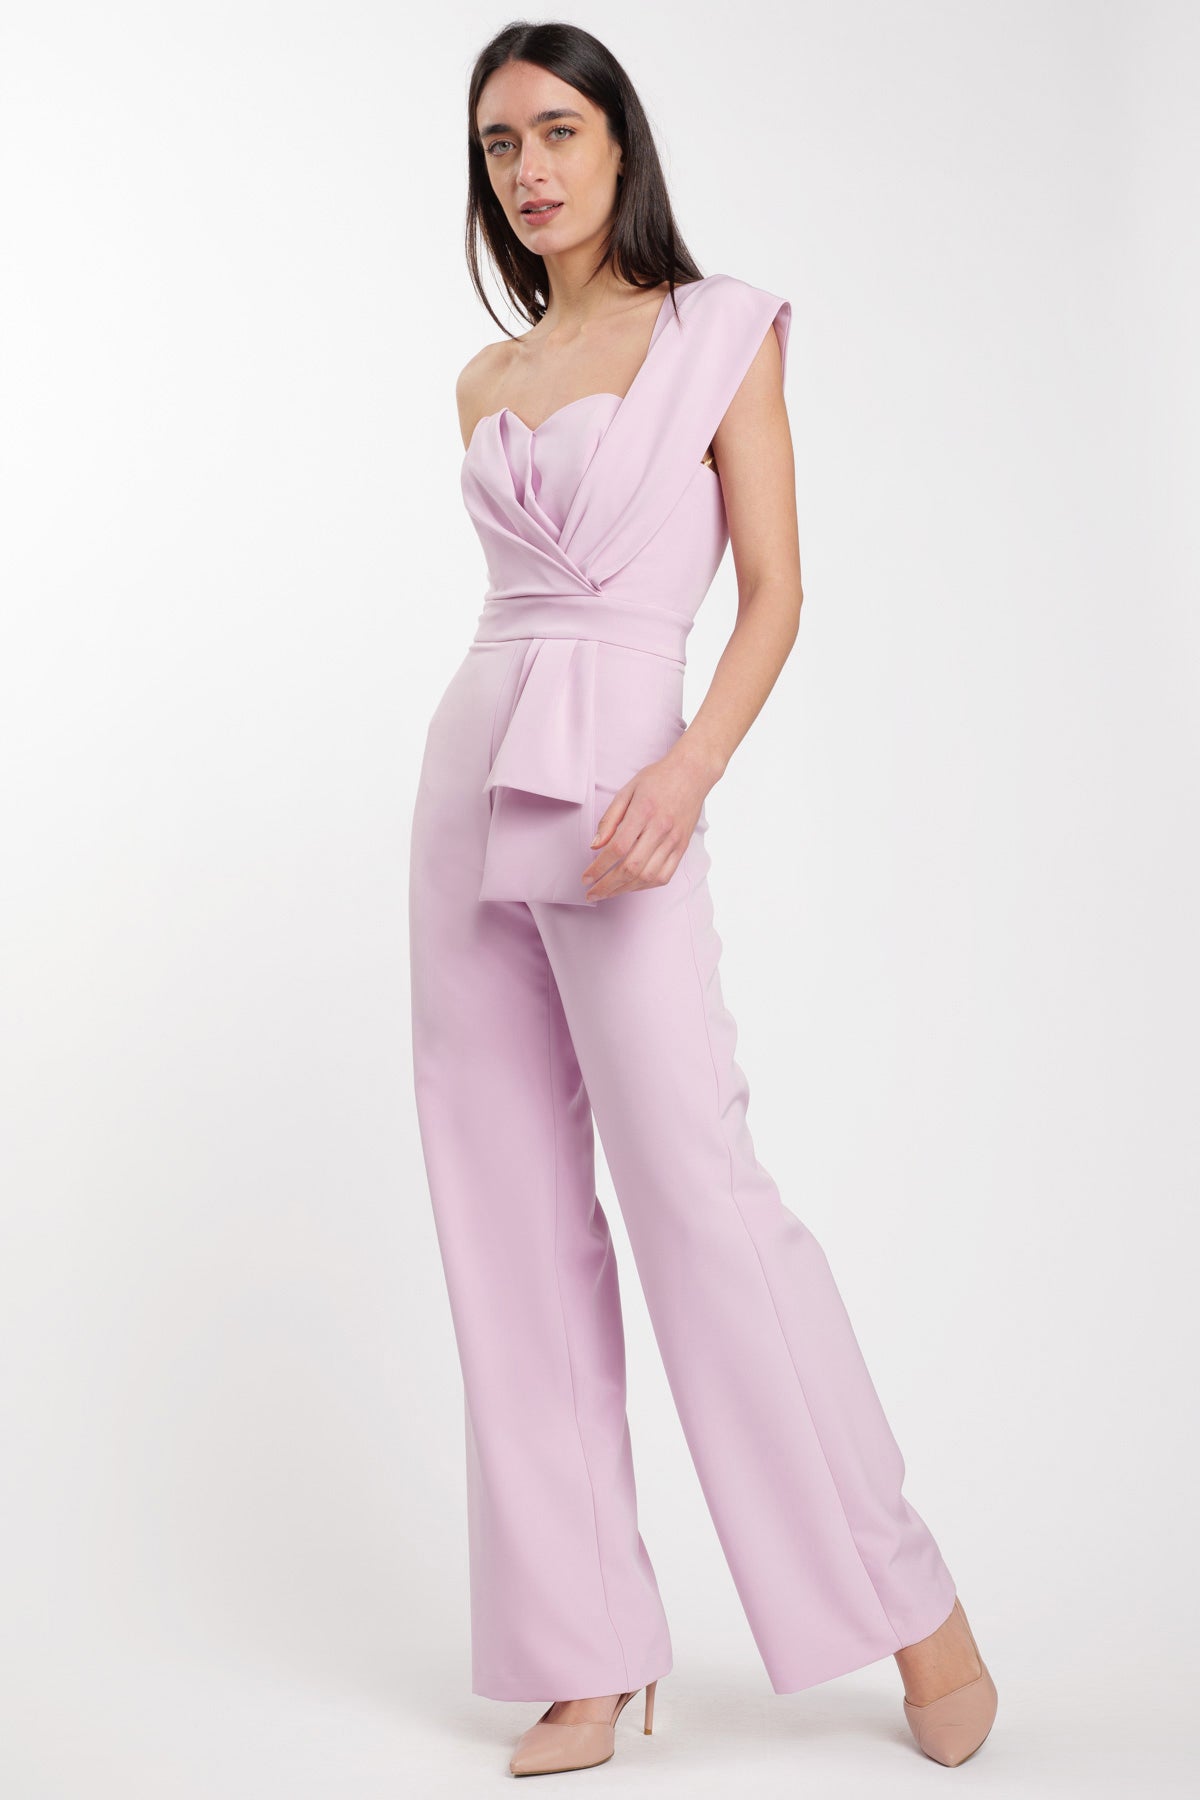 Jumpsuit Candy Wisteria